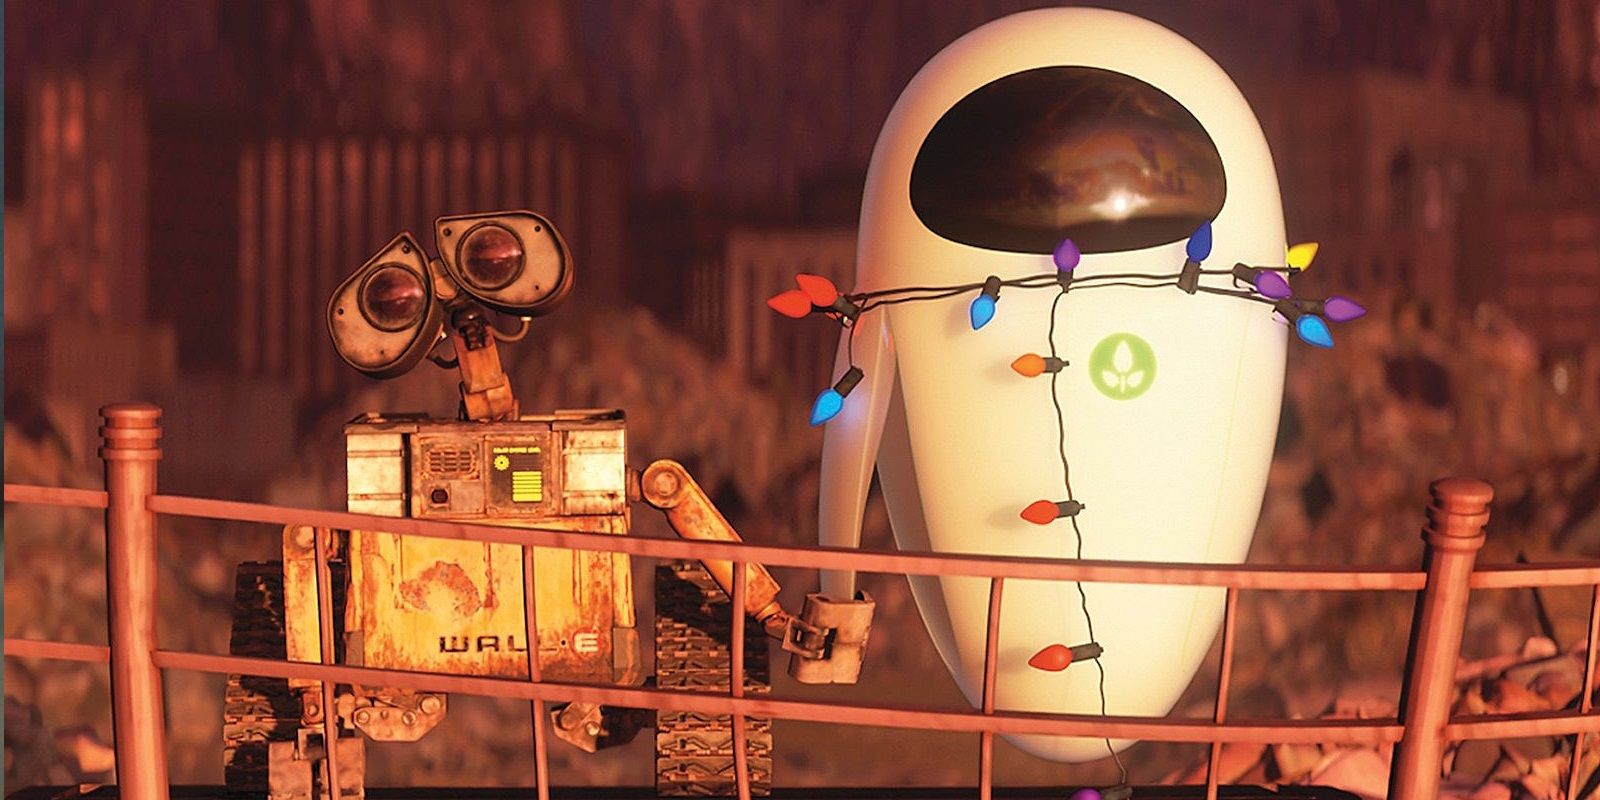 walle and eve